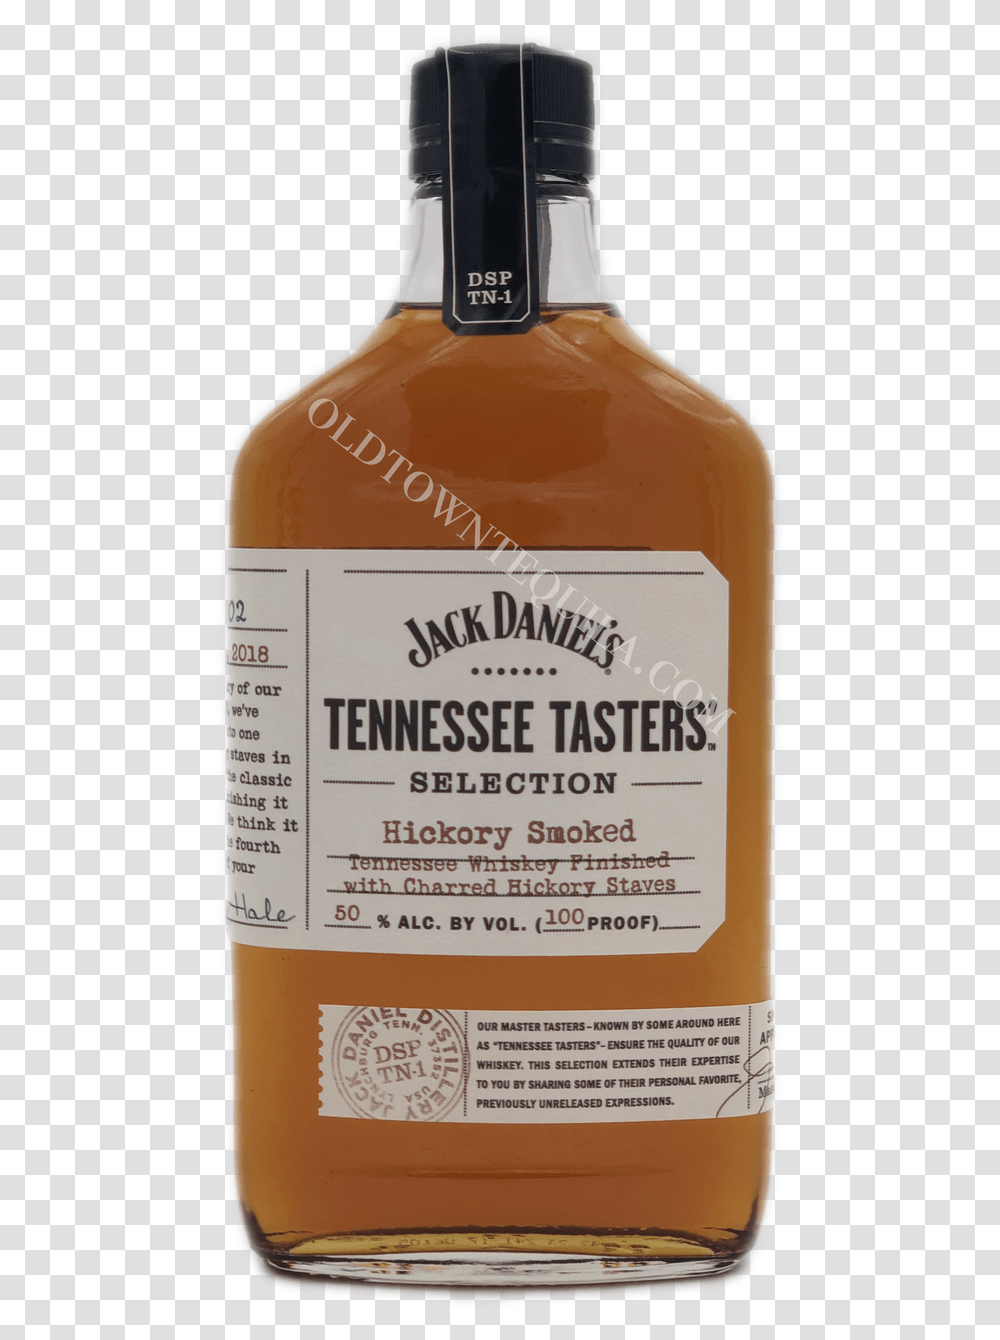 Jack Daniel's Tennessee Tasters Hickory Smoked Whiskey Glass Bottle, Liquor, Alcohol, Beverage, Drink Transparent Png